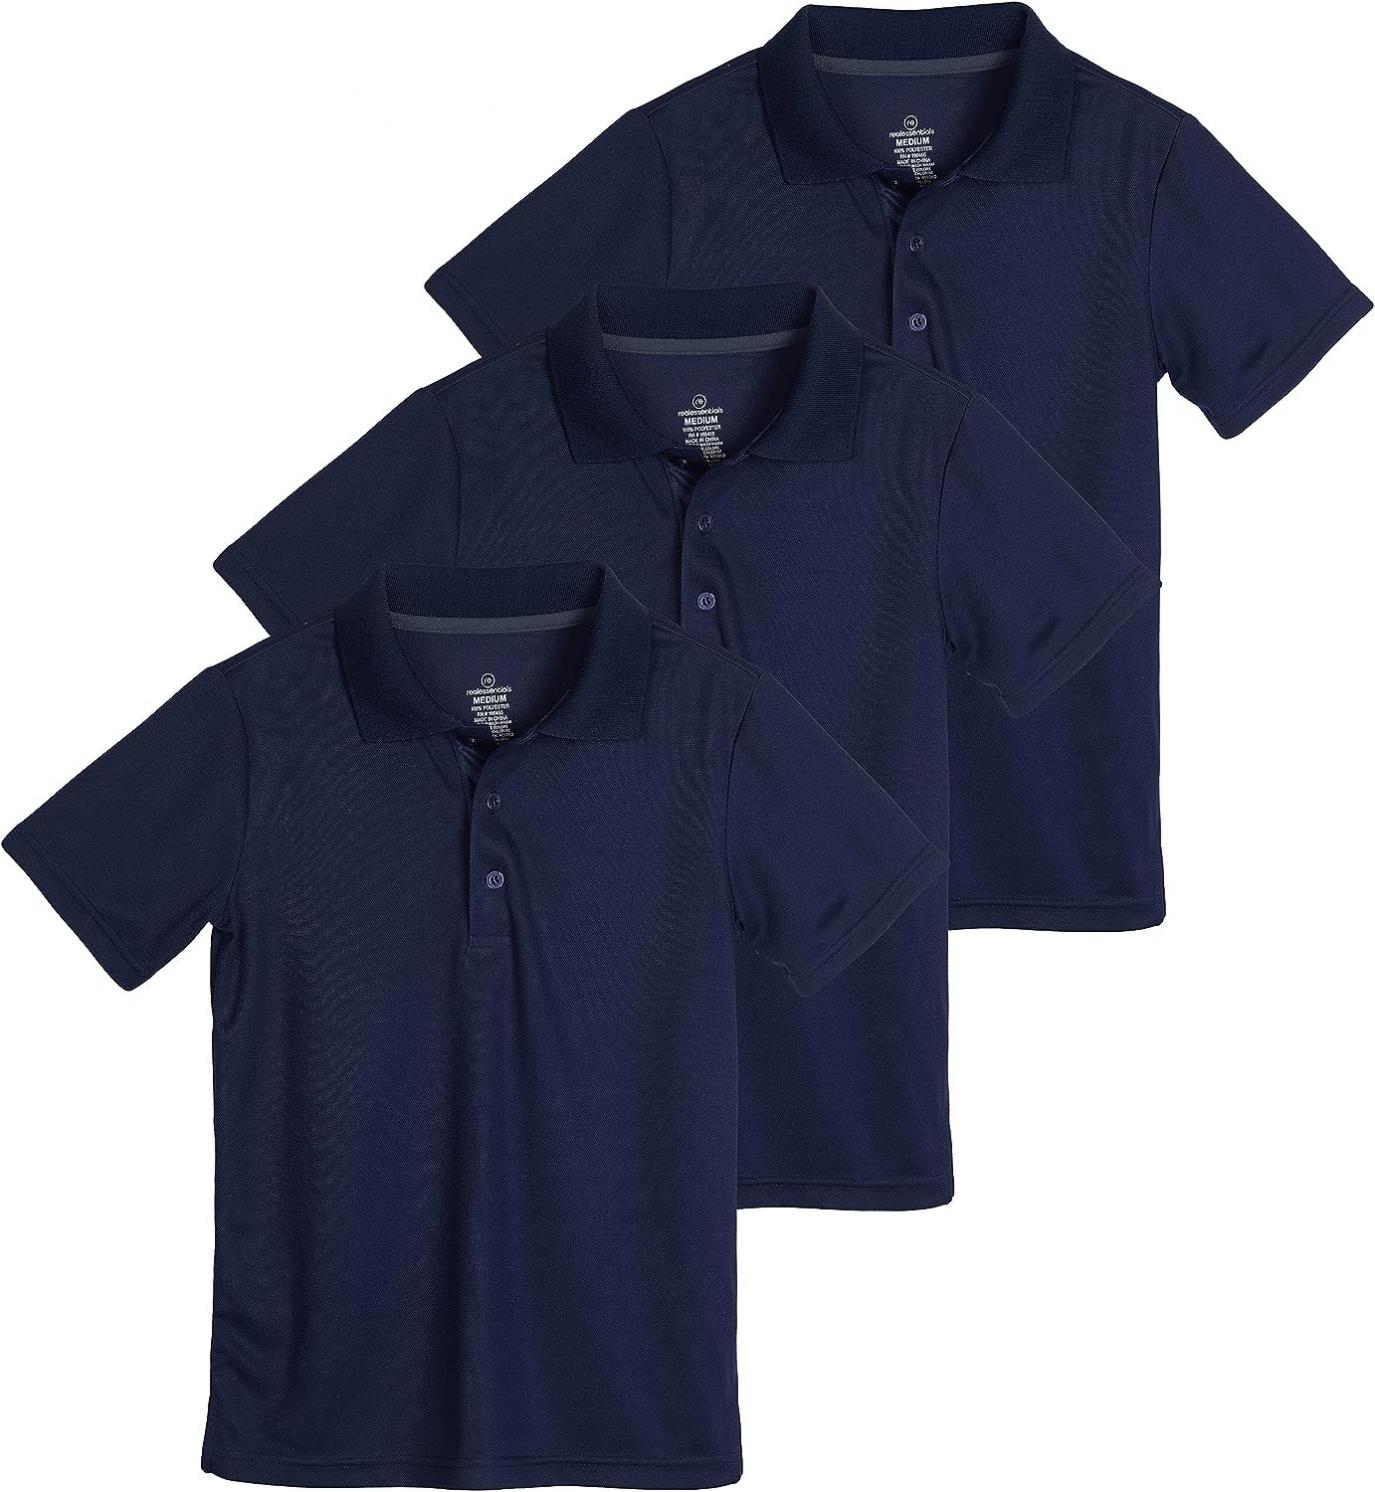 Real Essentials 3 Pack: Boy's Short Sleeve Polo Shirt - School Uniform Active Performance Golf (Ages 4-16)